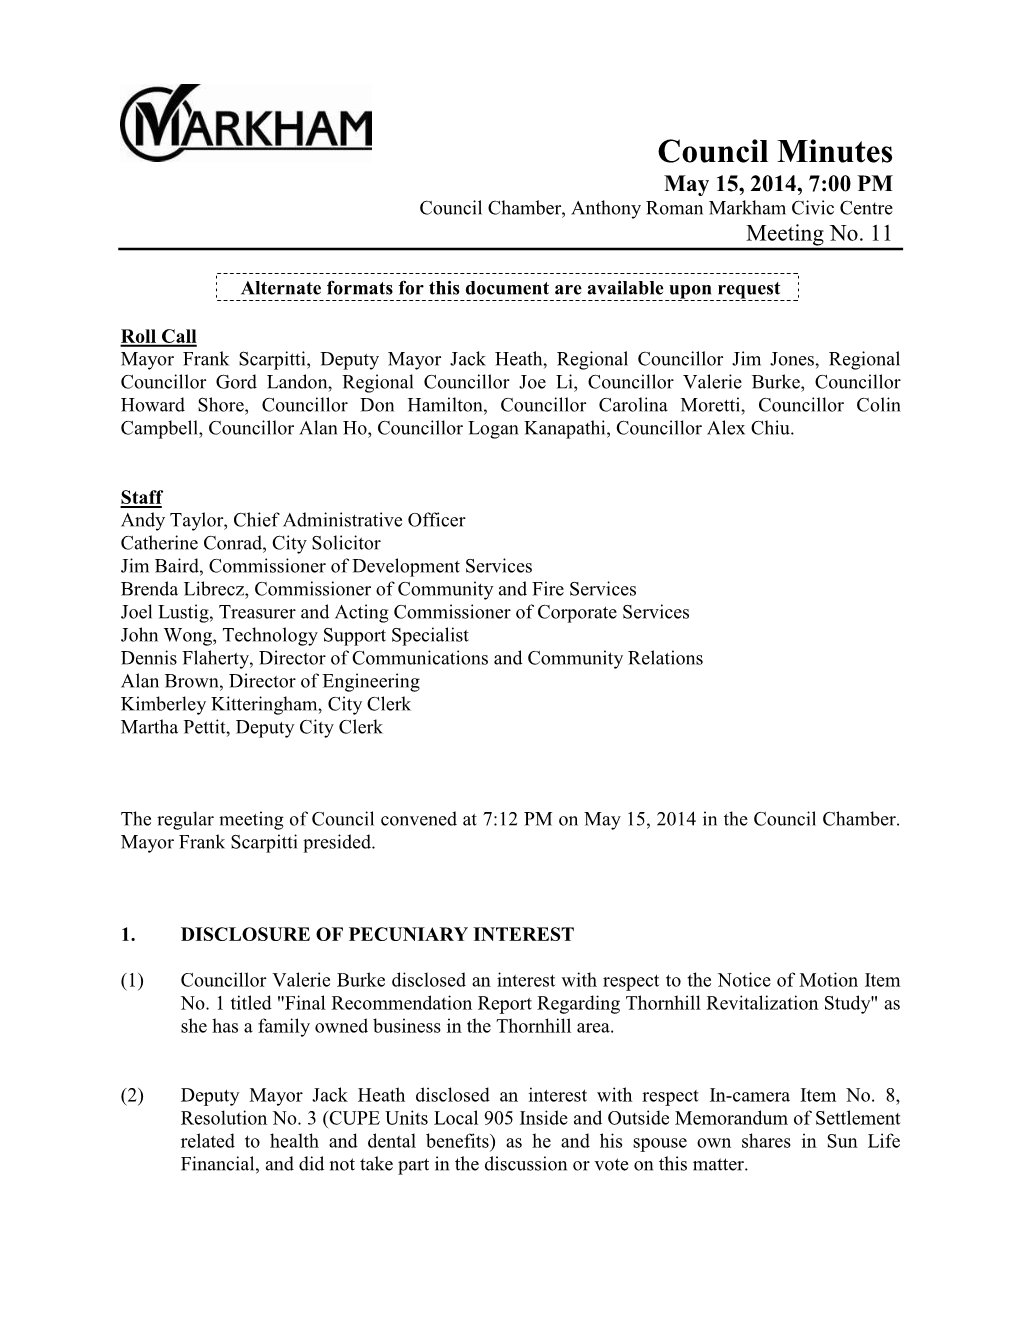 Council Minutes May 15, 2014, 7:00 PM Council Chamber, Anthony Roman Markham Civic Centre Meeting No